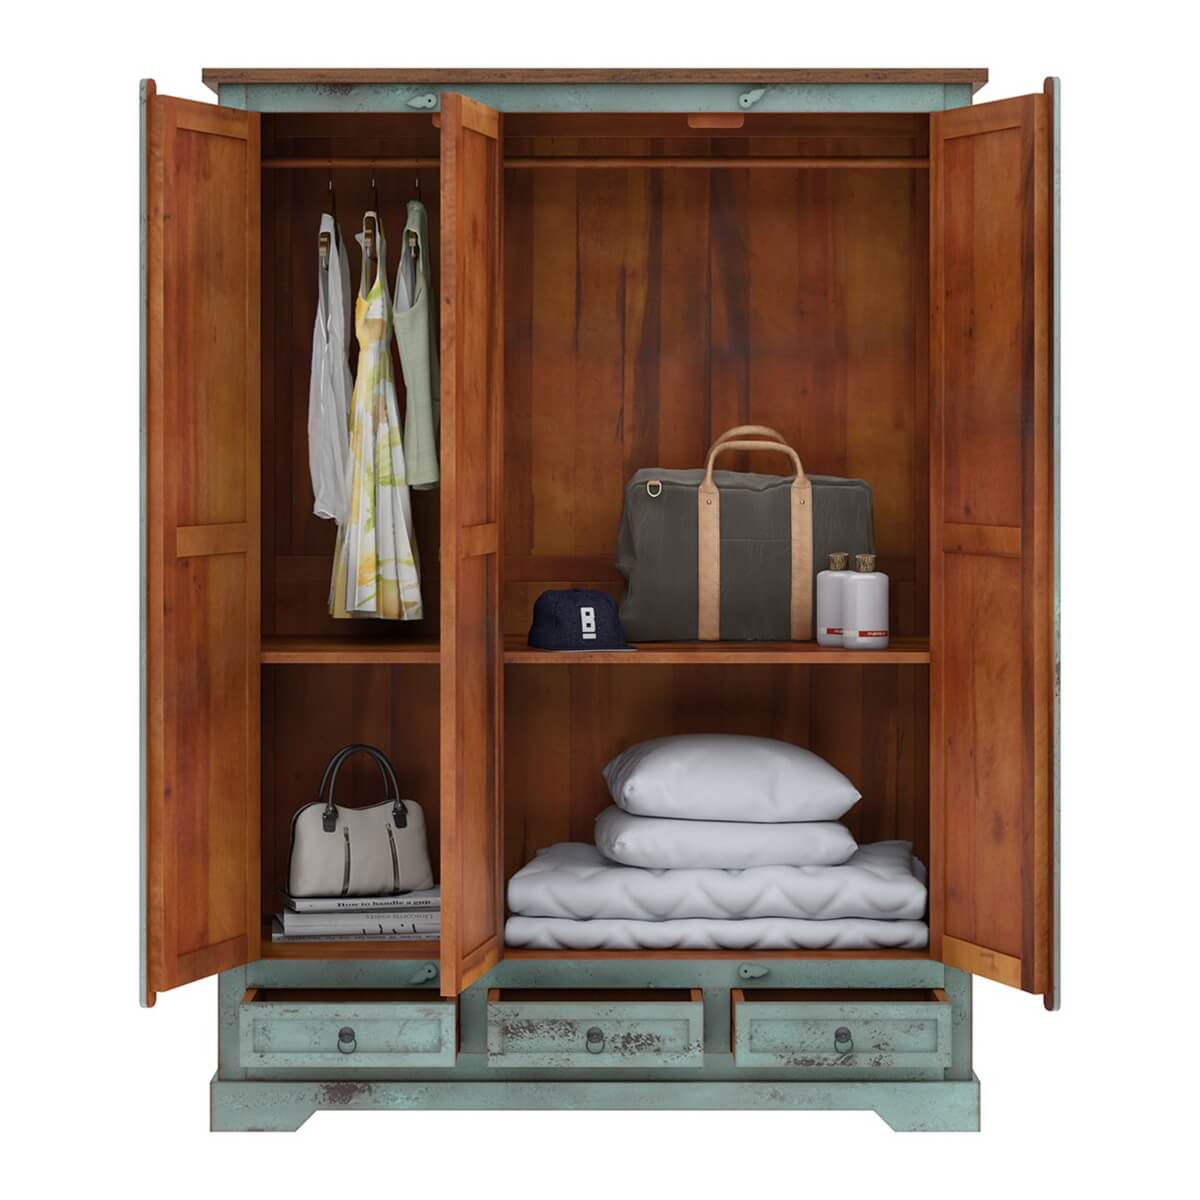 https://www.sierralivingconcepts.com/images/thumbs/0402947_scranton-solid-wood-rustic-armoire-with-hanging-rod-drawers.jpeg